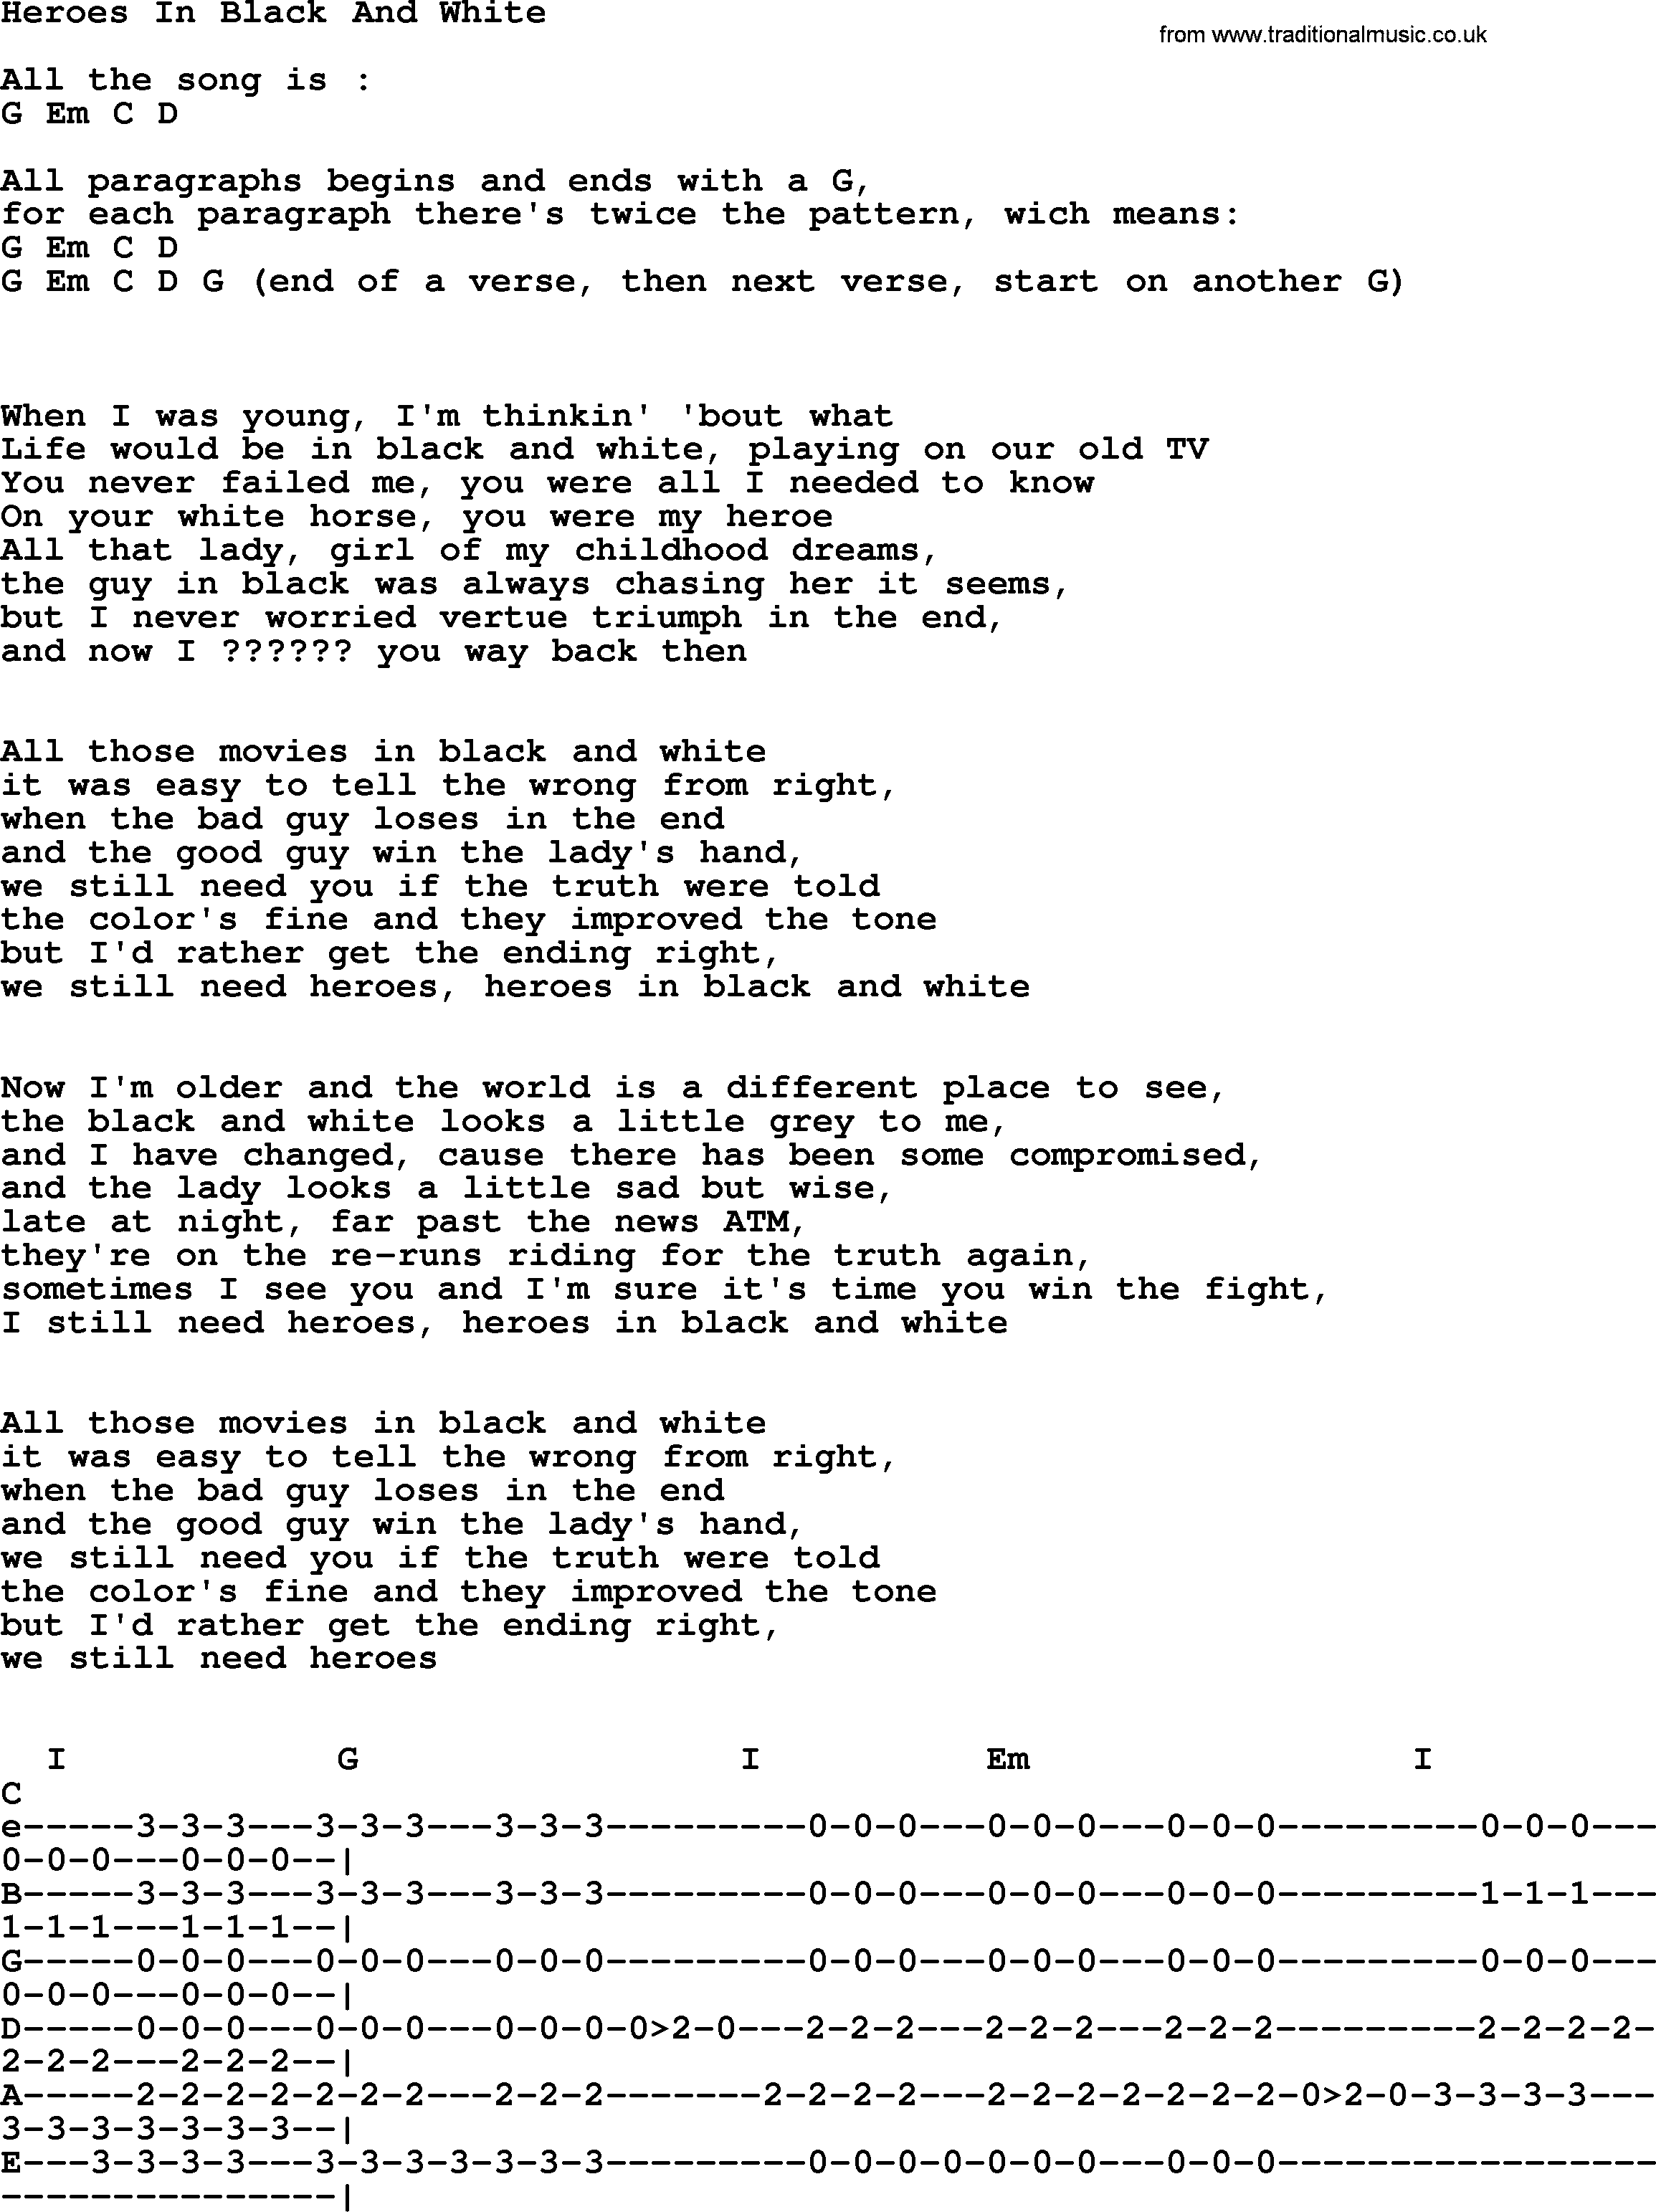 Johnny Cash song Heroes In Black And White, lyrics and chords